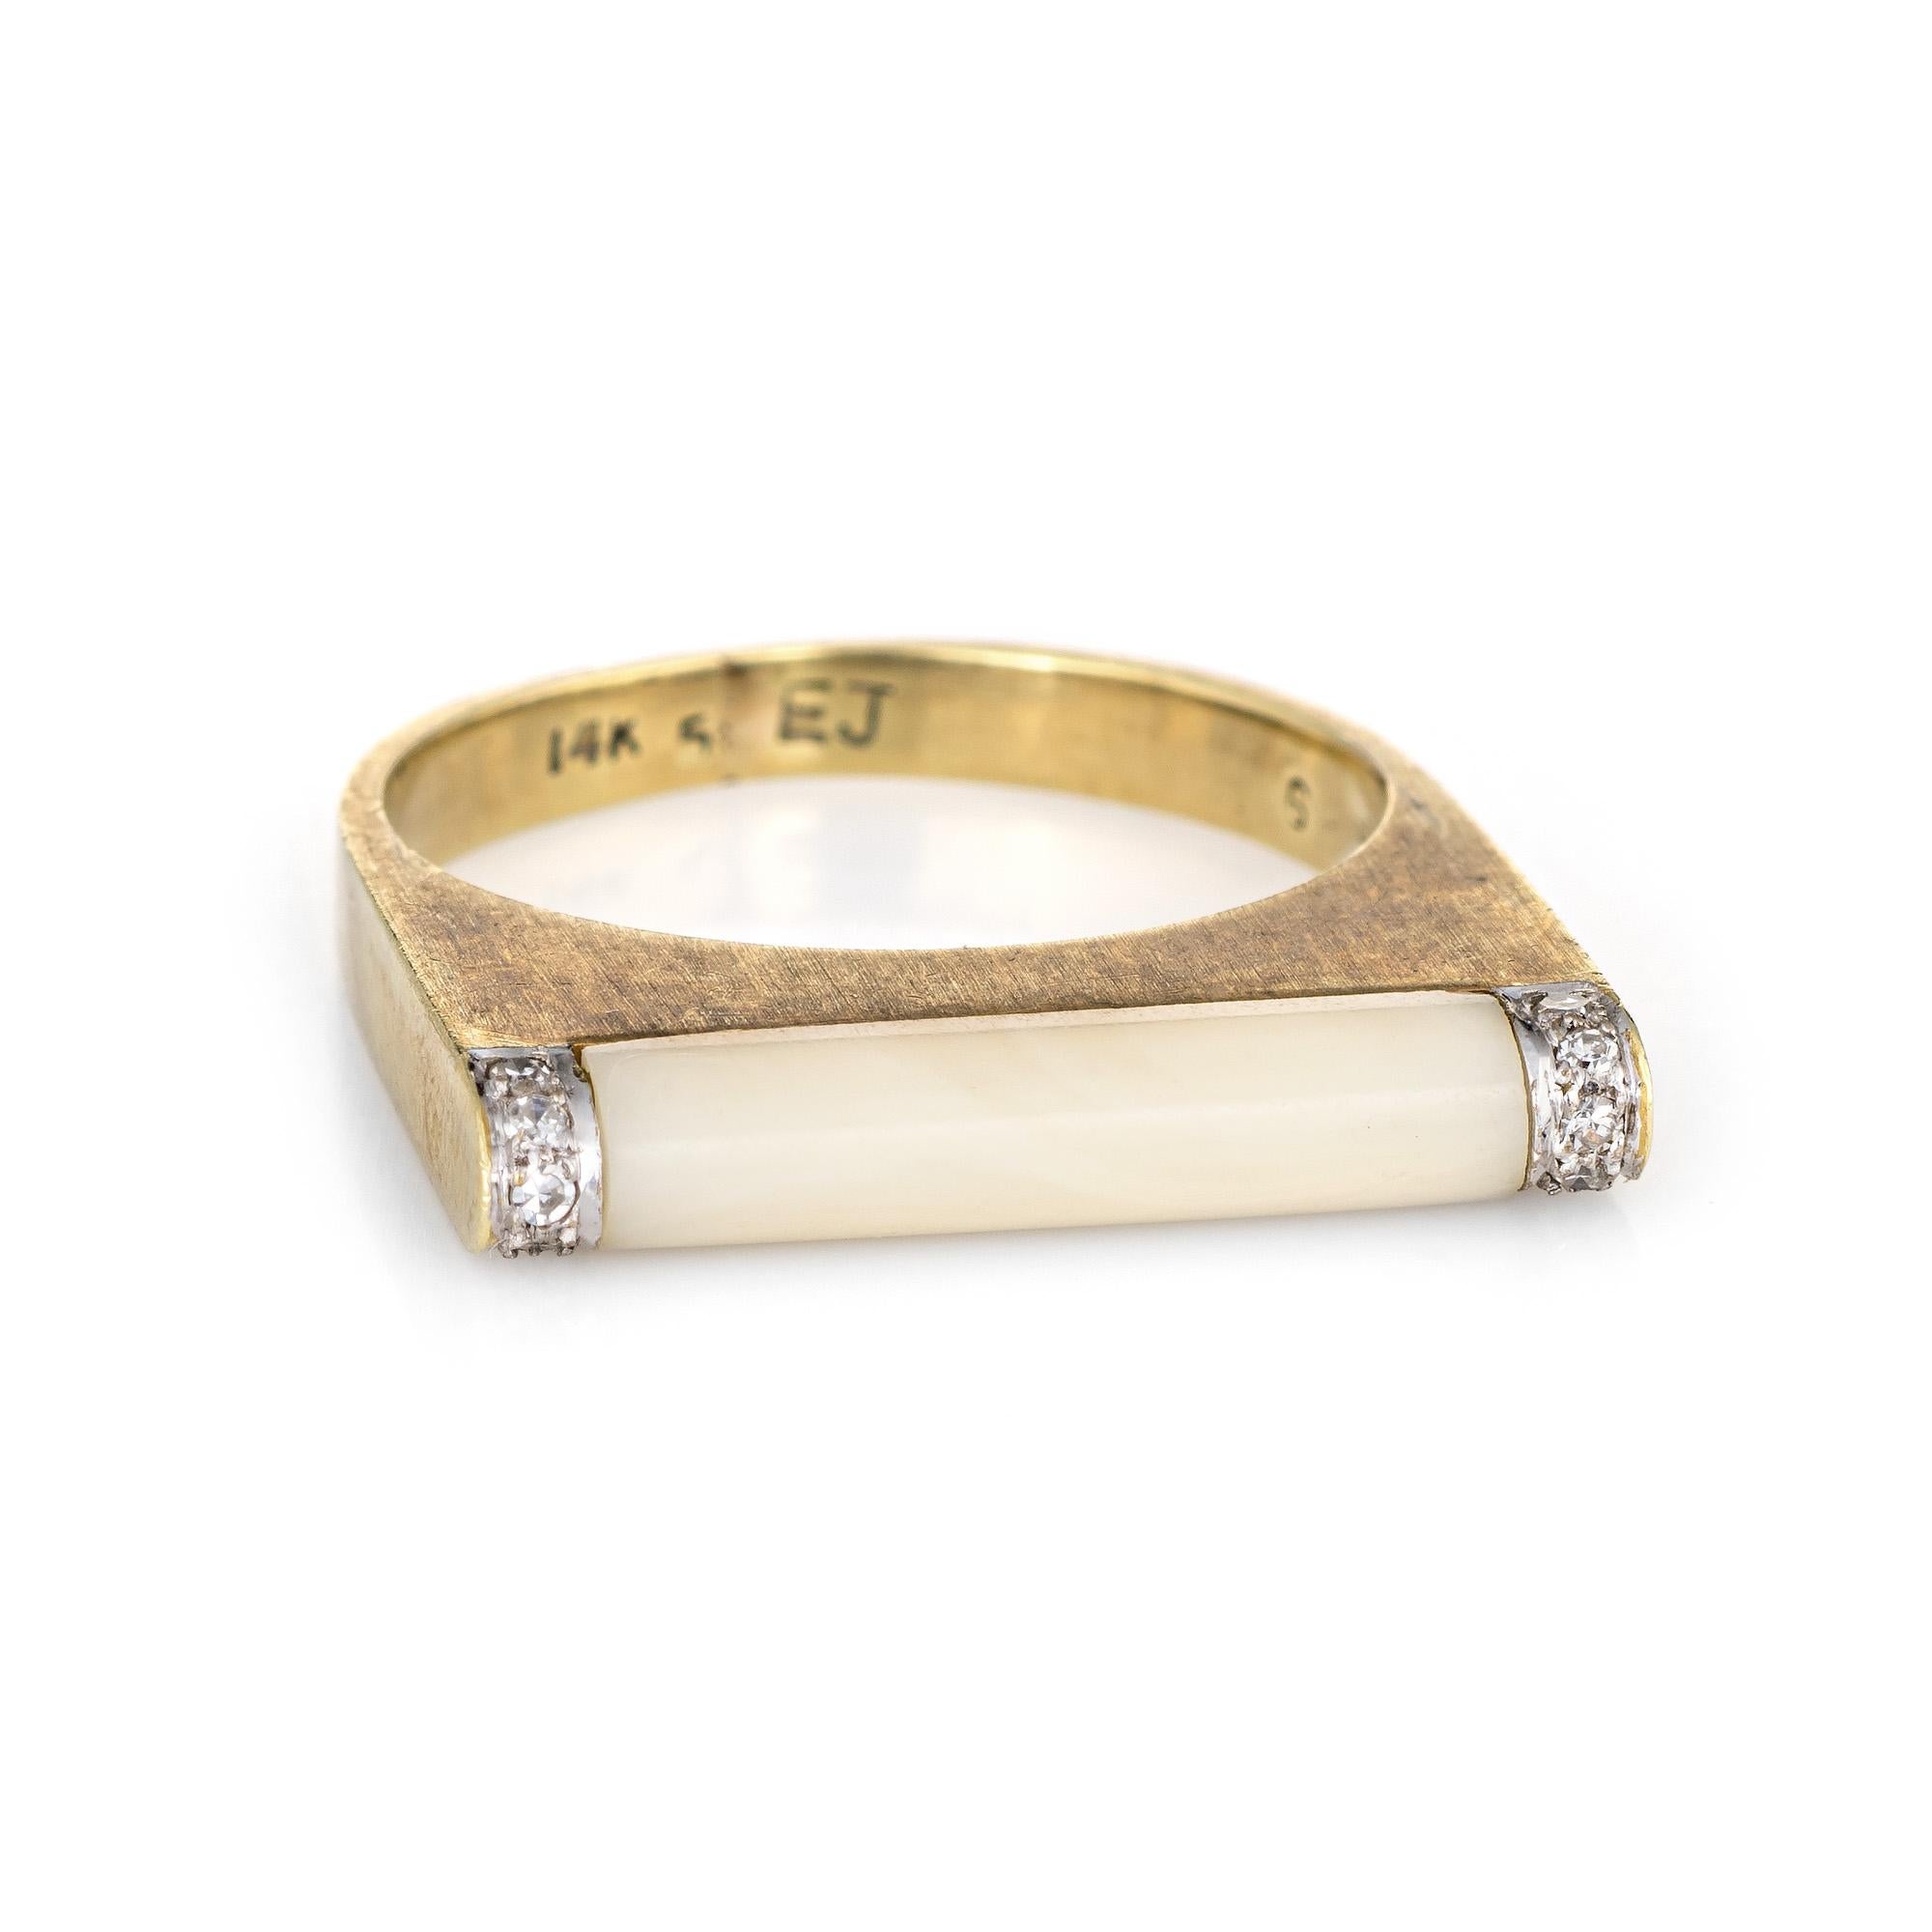 Stylish vintage white coral & diamond bar ring (circa 1970s) crafted in 14 karat yellow gold. 

White coral measures 16mm x 3mm, accented with an estimated 0.05 carats of diamonds (estimated at I-J color and SI1-2 clarity). The coral is in excellent